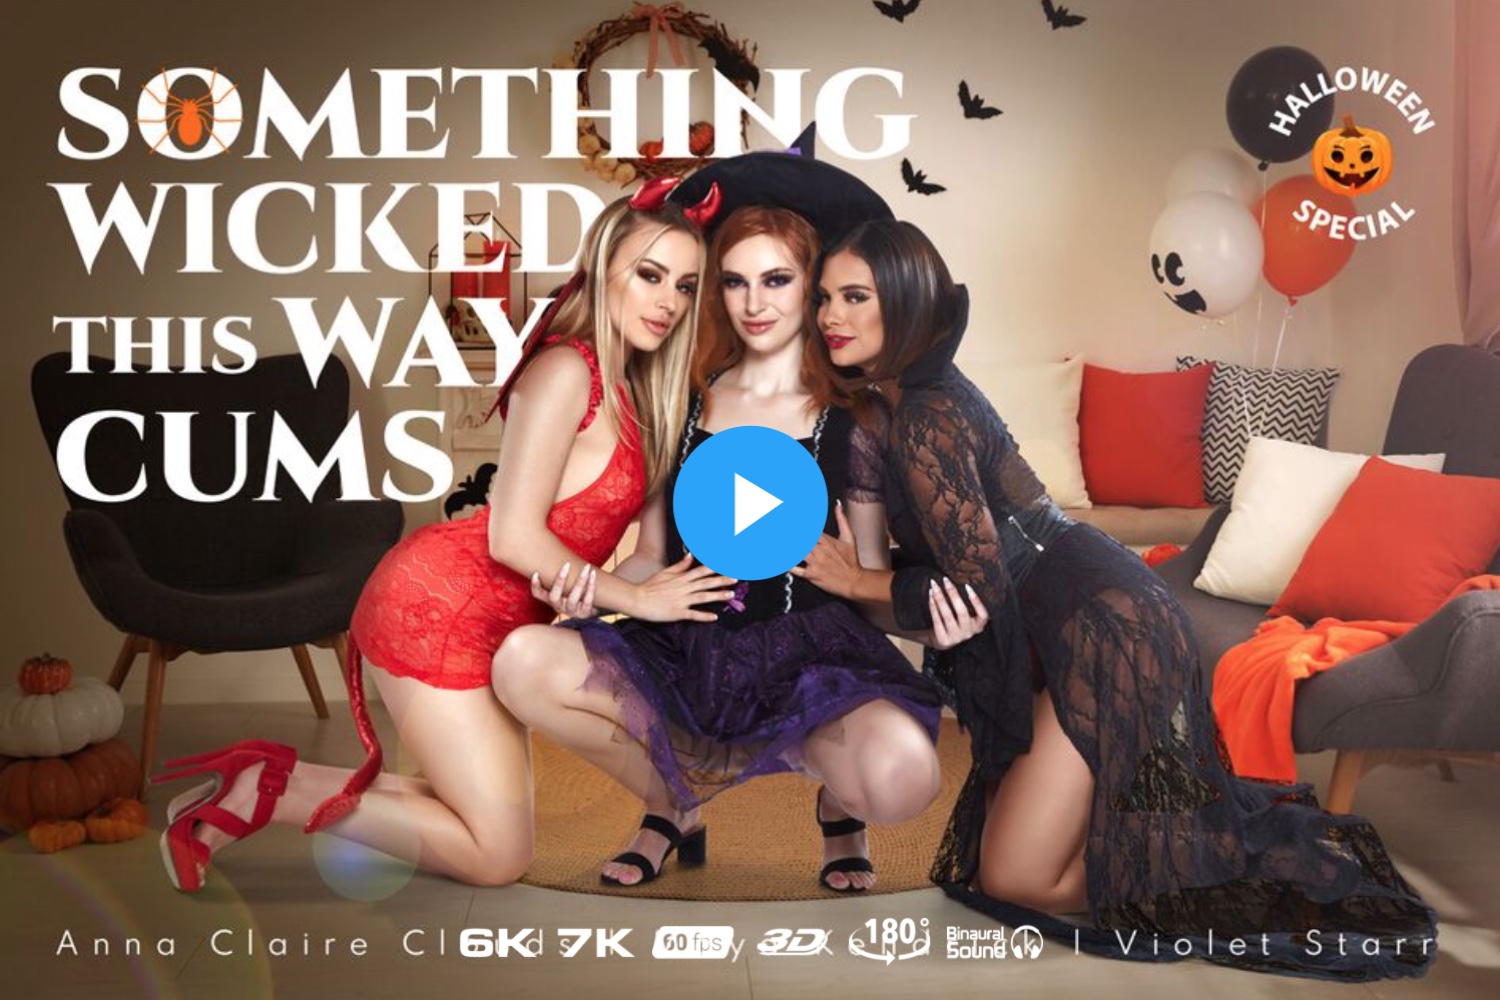 Something Wicked This Way Cums - Something Wicked This Way Cums VR Porn - Something Wicked This Way Cums Virtual Reality Porn - Anna Claire Clouds VR Porn - Anna Claire Clouds Virtual Reality Porn